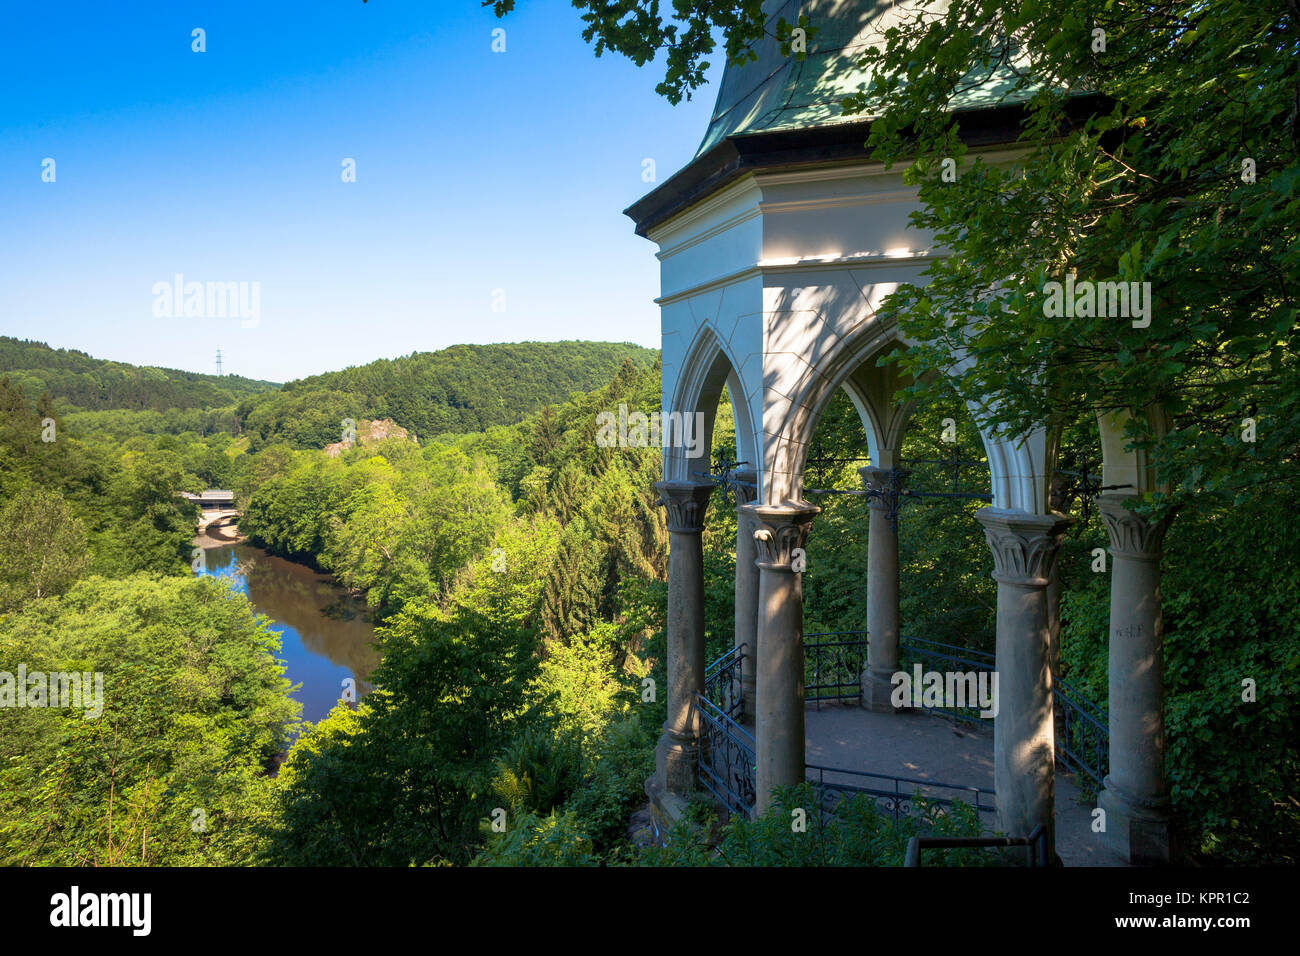 Europe, Germany, the Bergisches Land region, Solingen, view from the Diederichs temple near the Muengstener bridge to the river Wupper.  Europa, Deuts Stock Photo